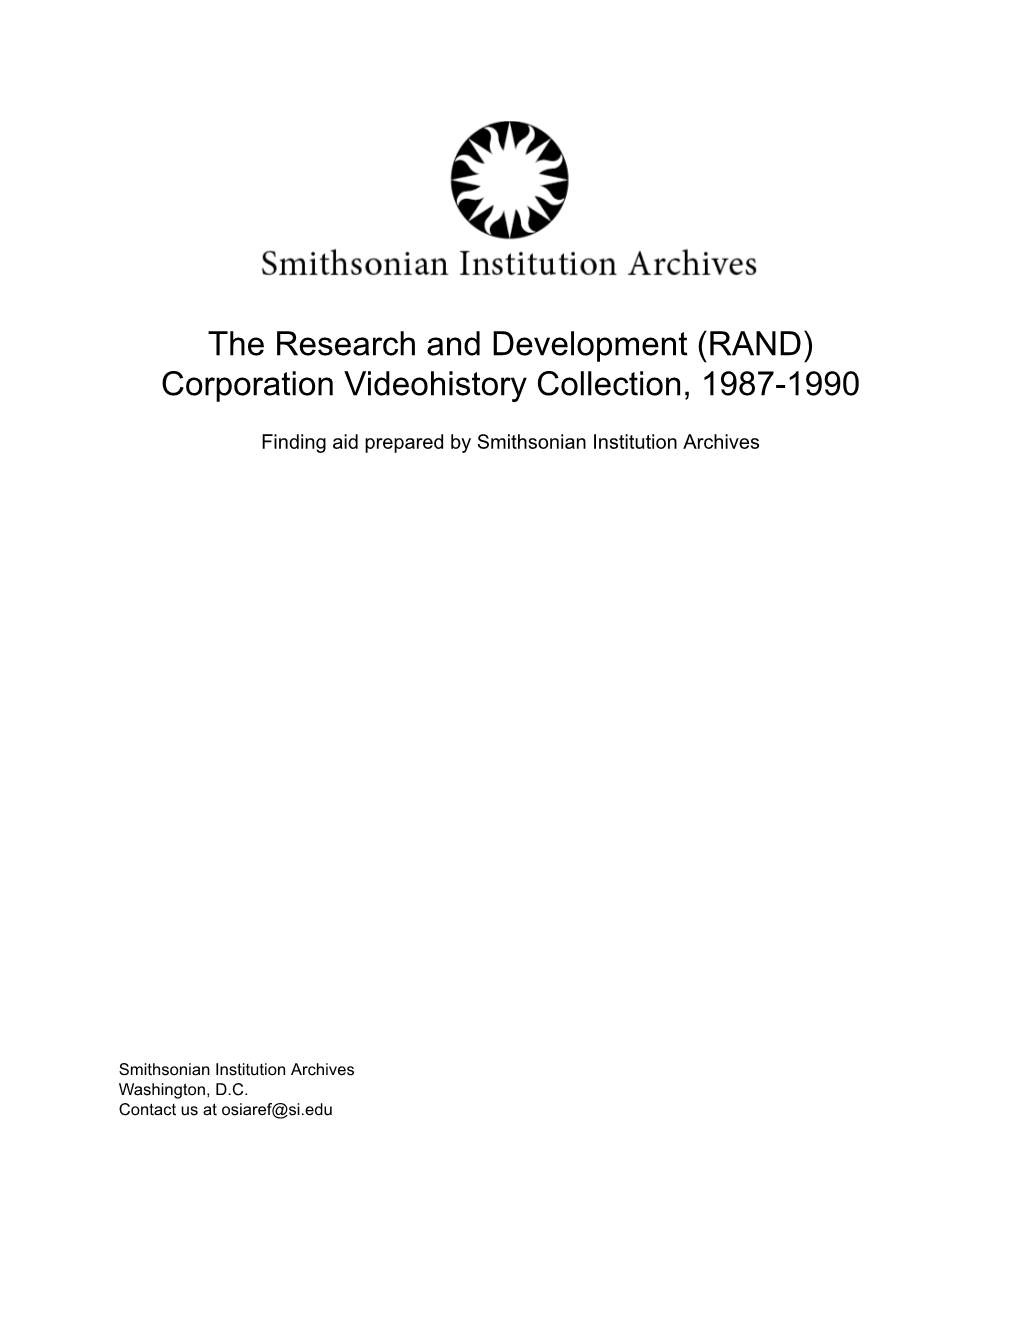 The Research and Development (RAND) Corporation Videohistory Collection, 1987-1990